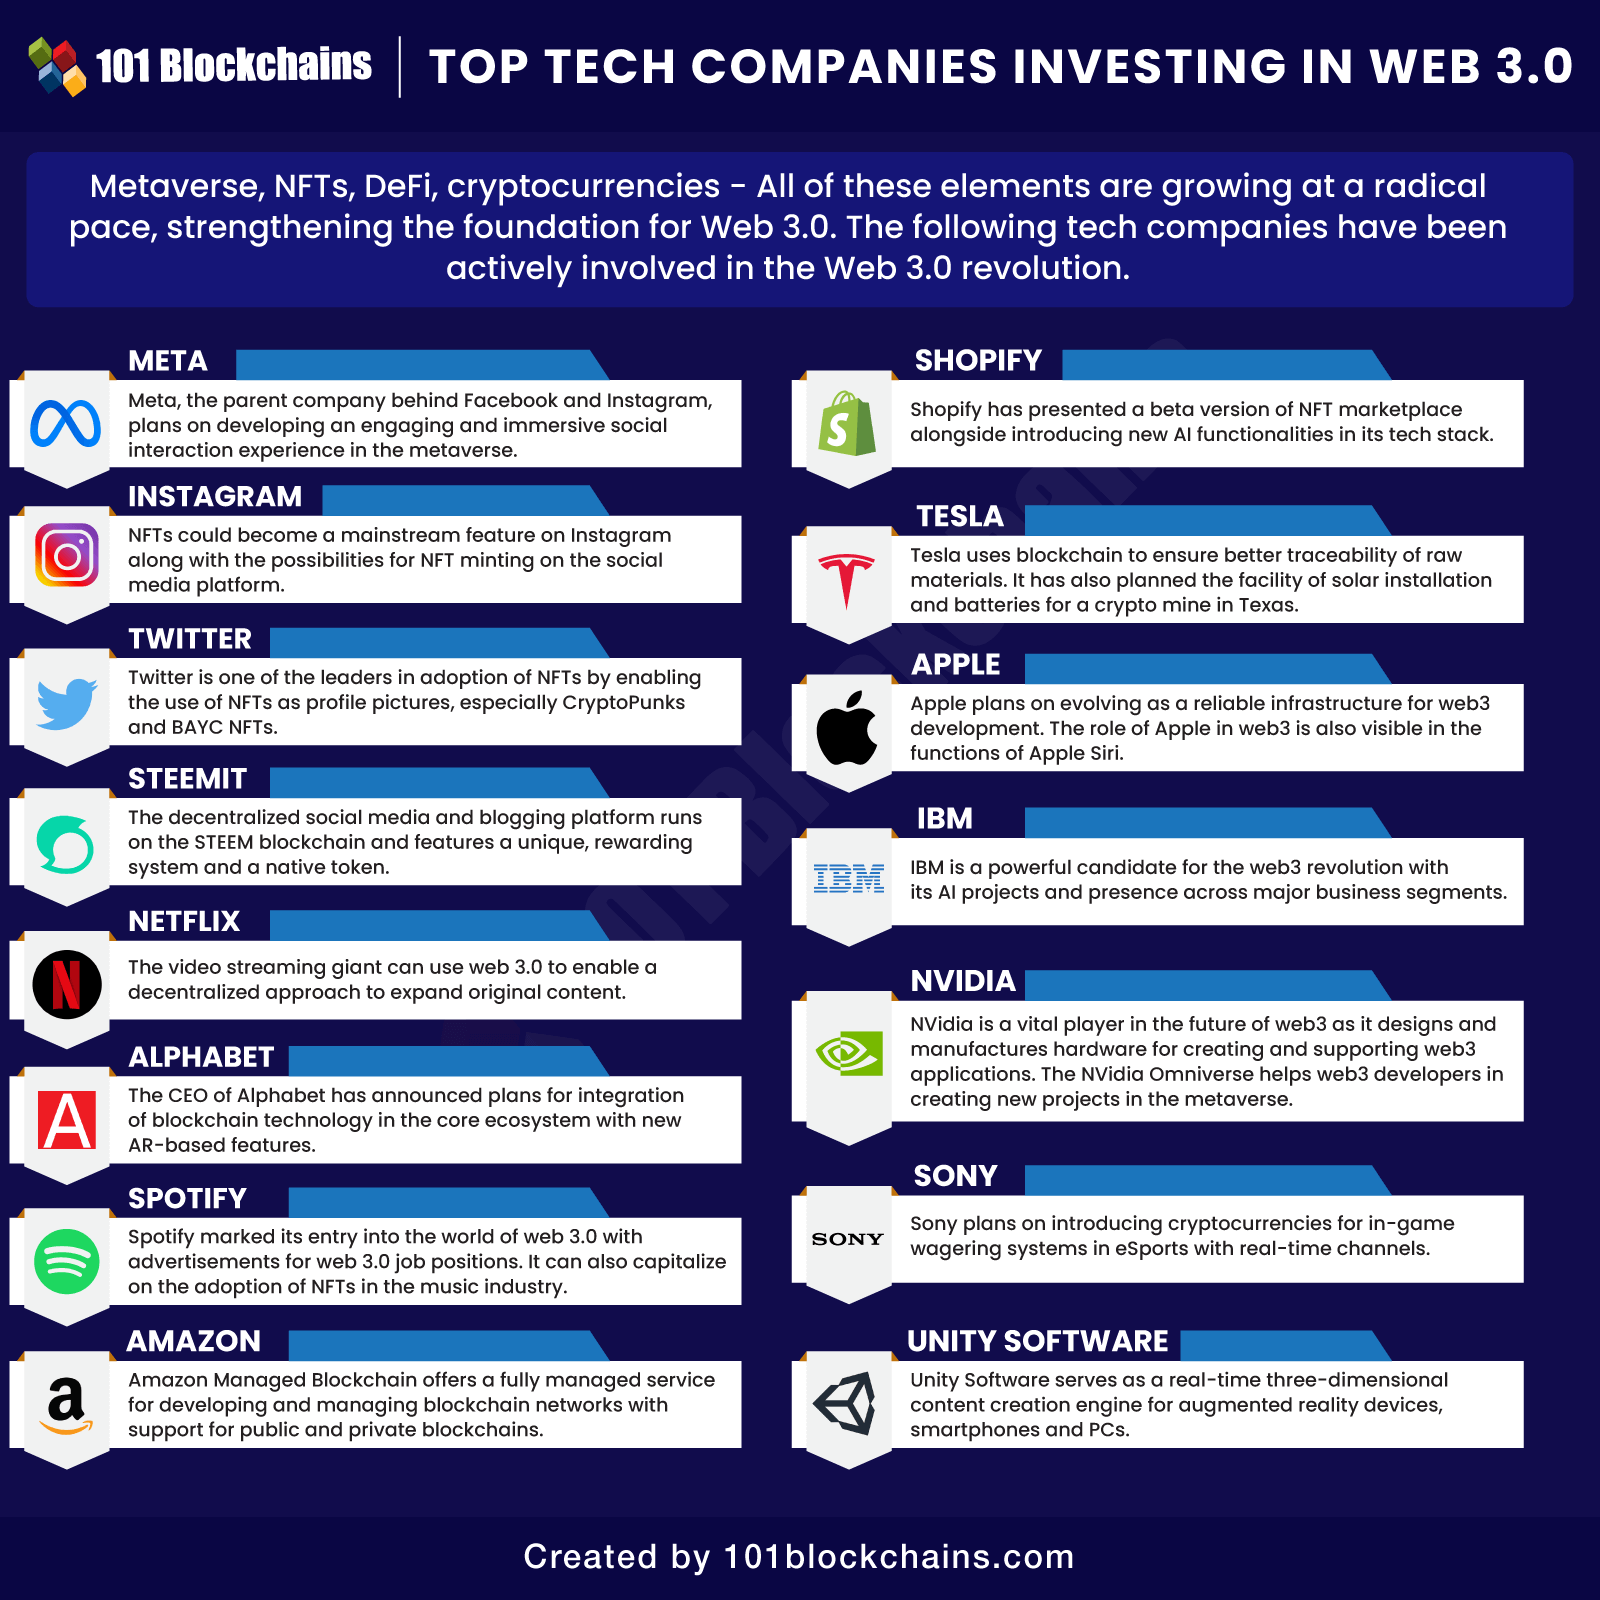 Top Tech Firms Investing in Web 3.0